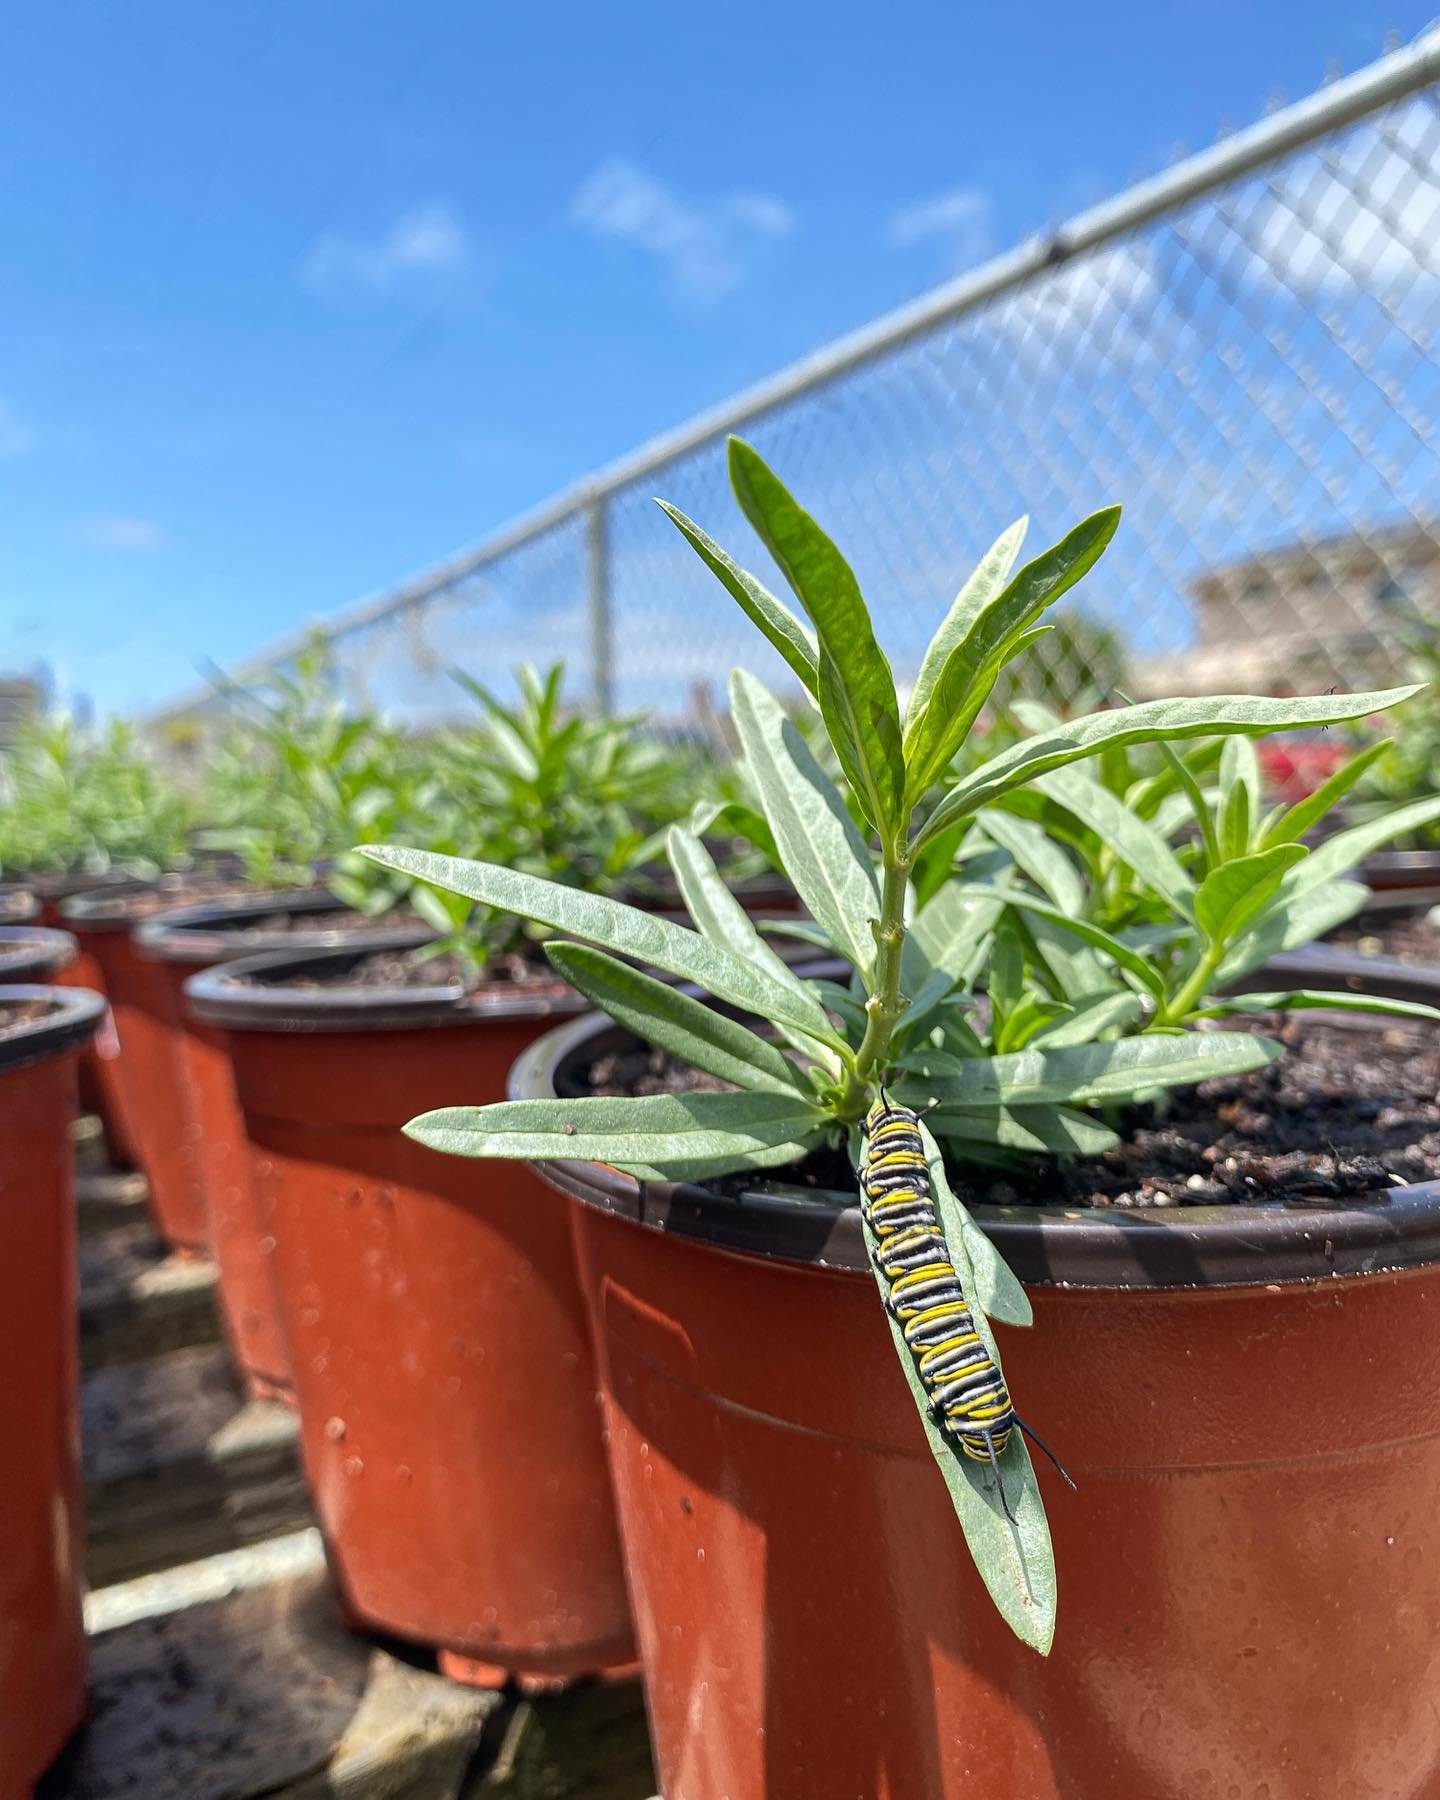 It&rsquo;s milkweed time - let the caterpillar feasting begin! We currently have two species of native milkweed ready for purchase:&nbsp;
&nbsp;
&bull; Narrow Leaf Milkweed (Asclepias fascicularis) &bull;
$10 for a 1 gallon&nbsp; Probably the single 